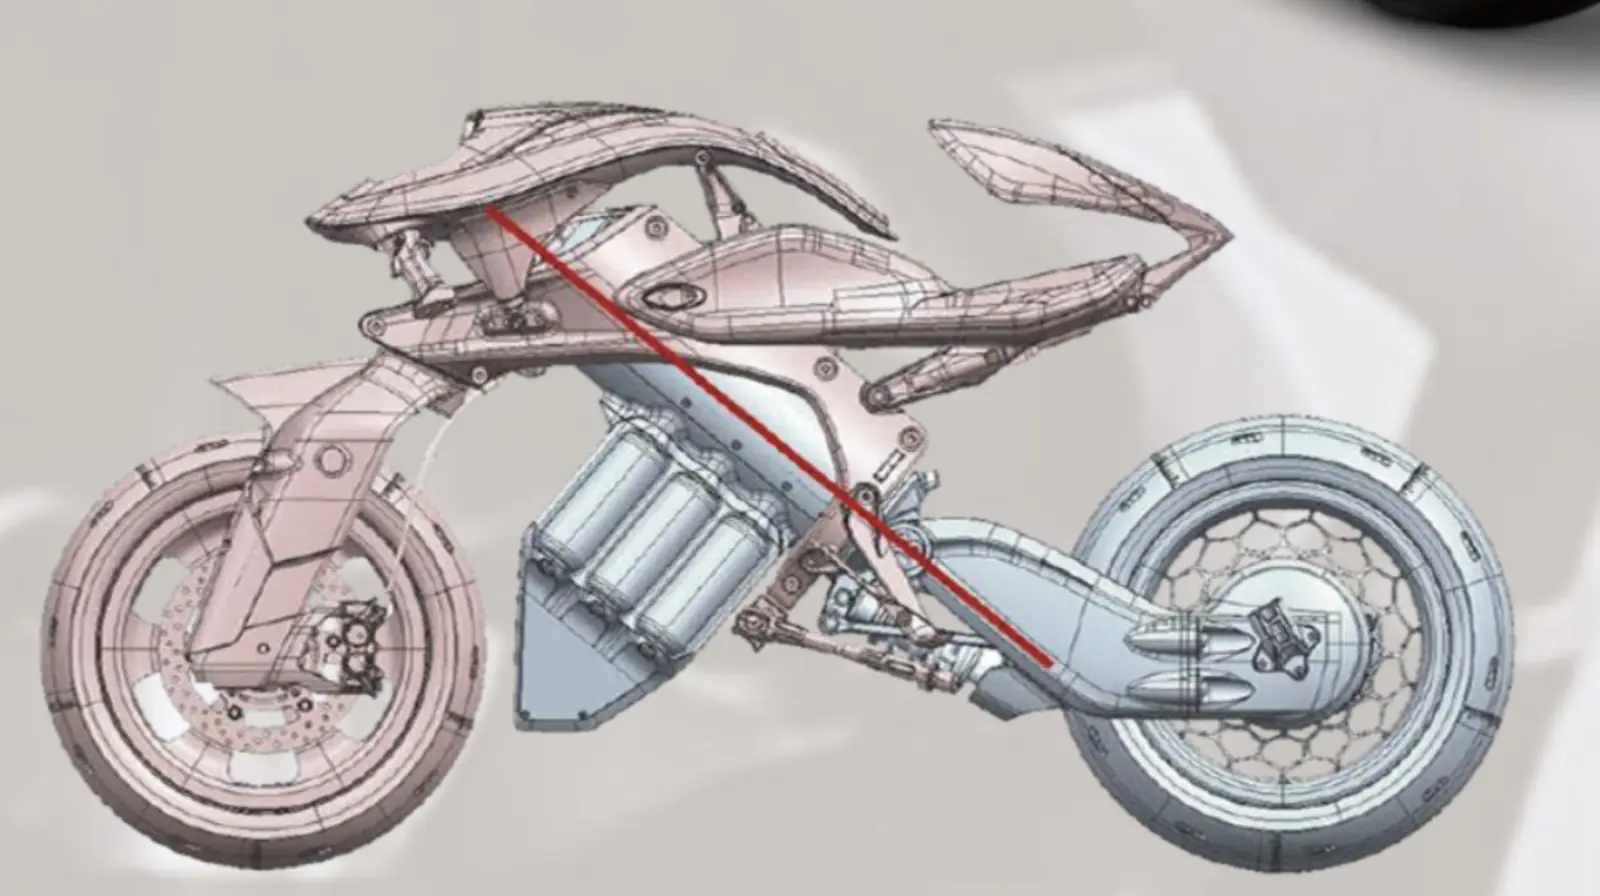 Motoroid: Unique motorcycle Yamaha will run with gestures, know its features